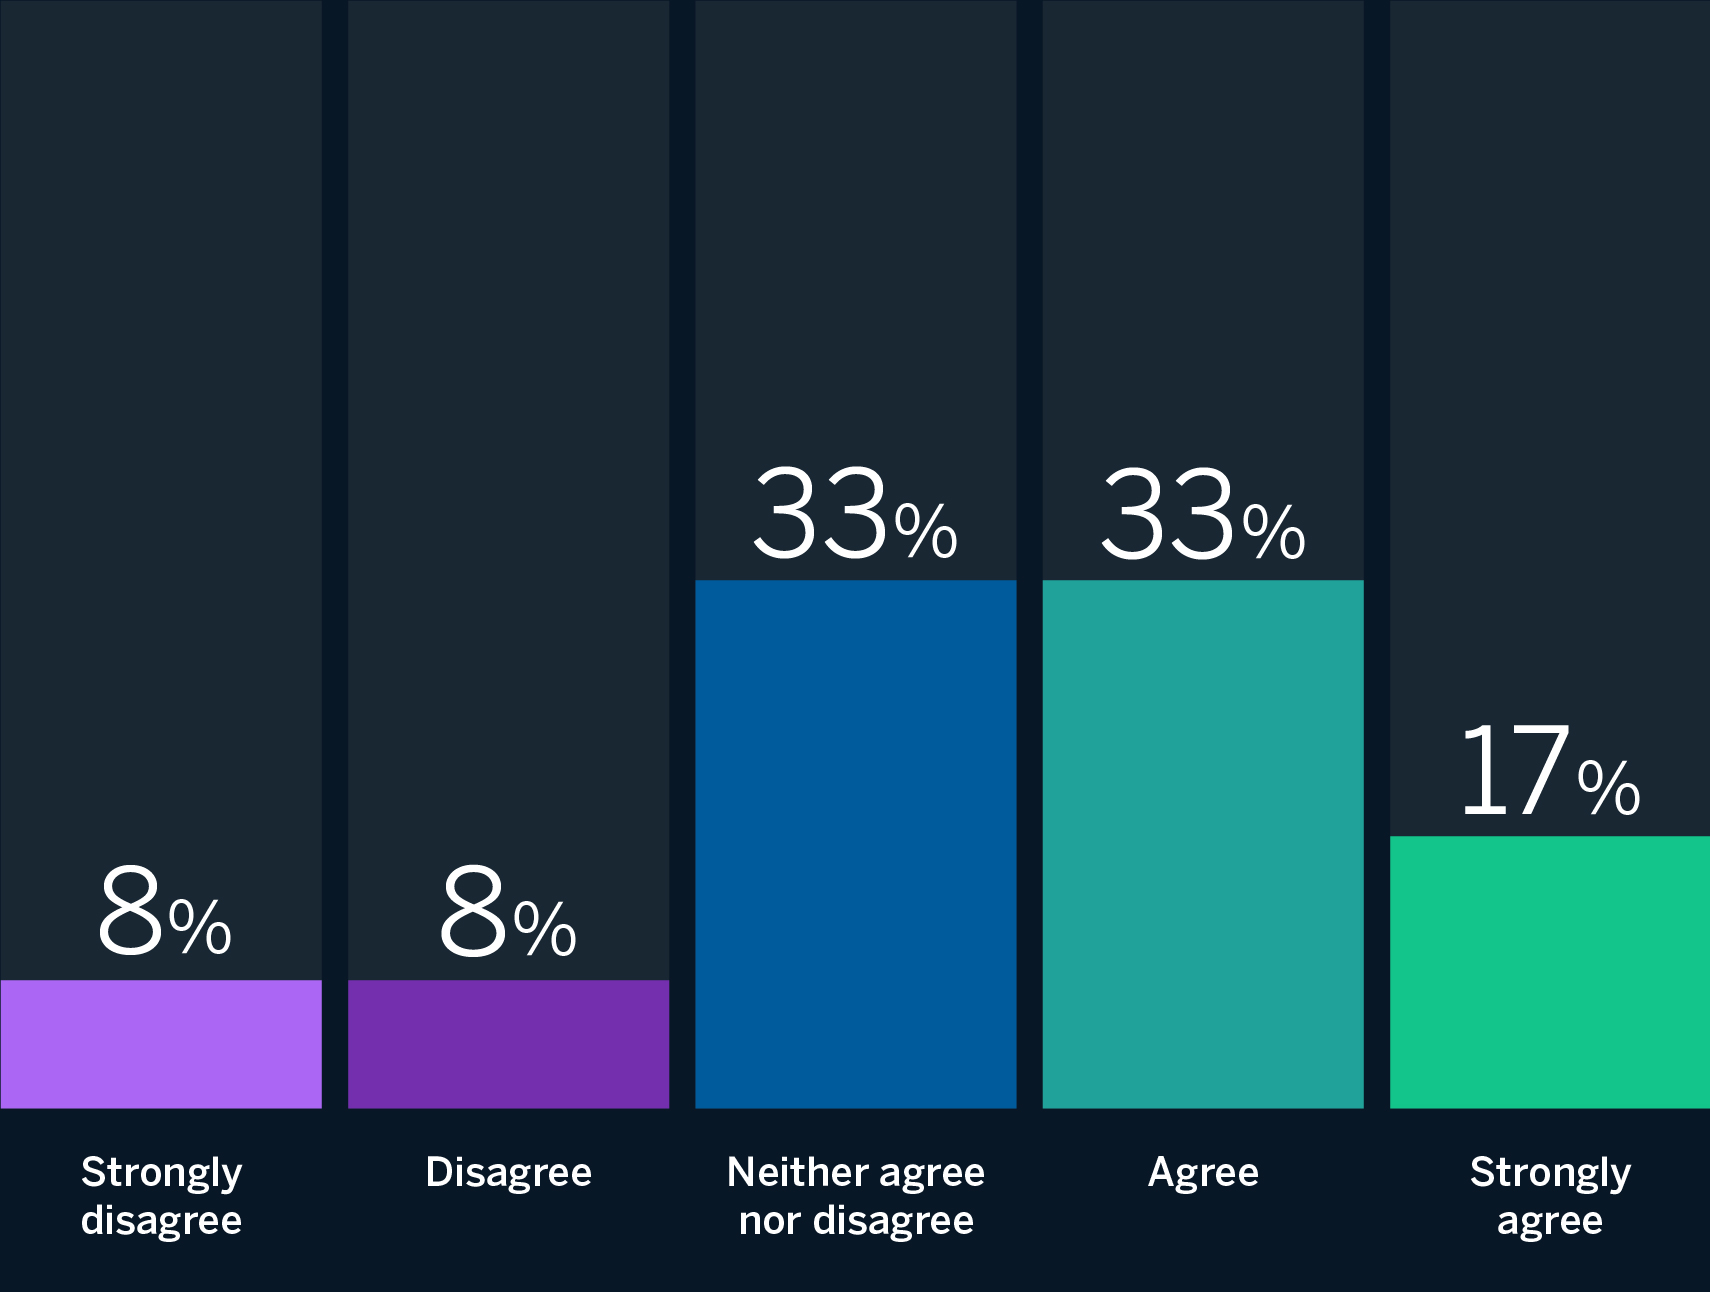 Chart: 8% strongly disagree, 8% disagree, 33% neither agree nor disagree, 33% agree, 17% strongly agree